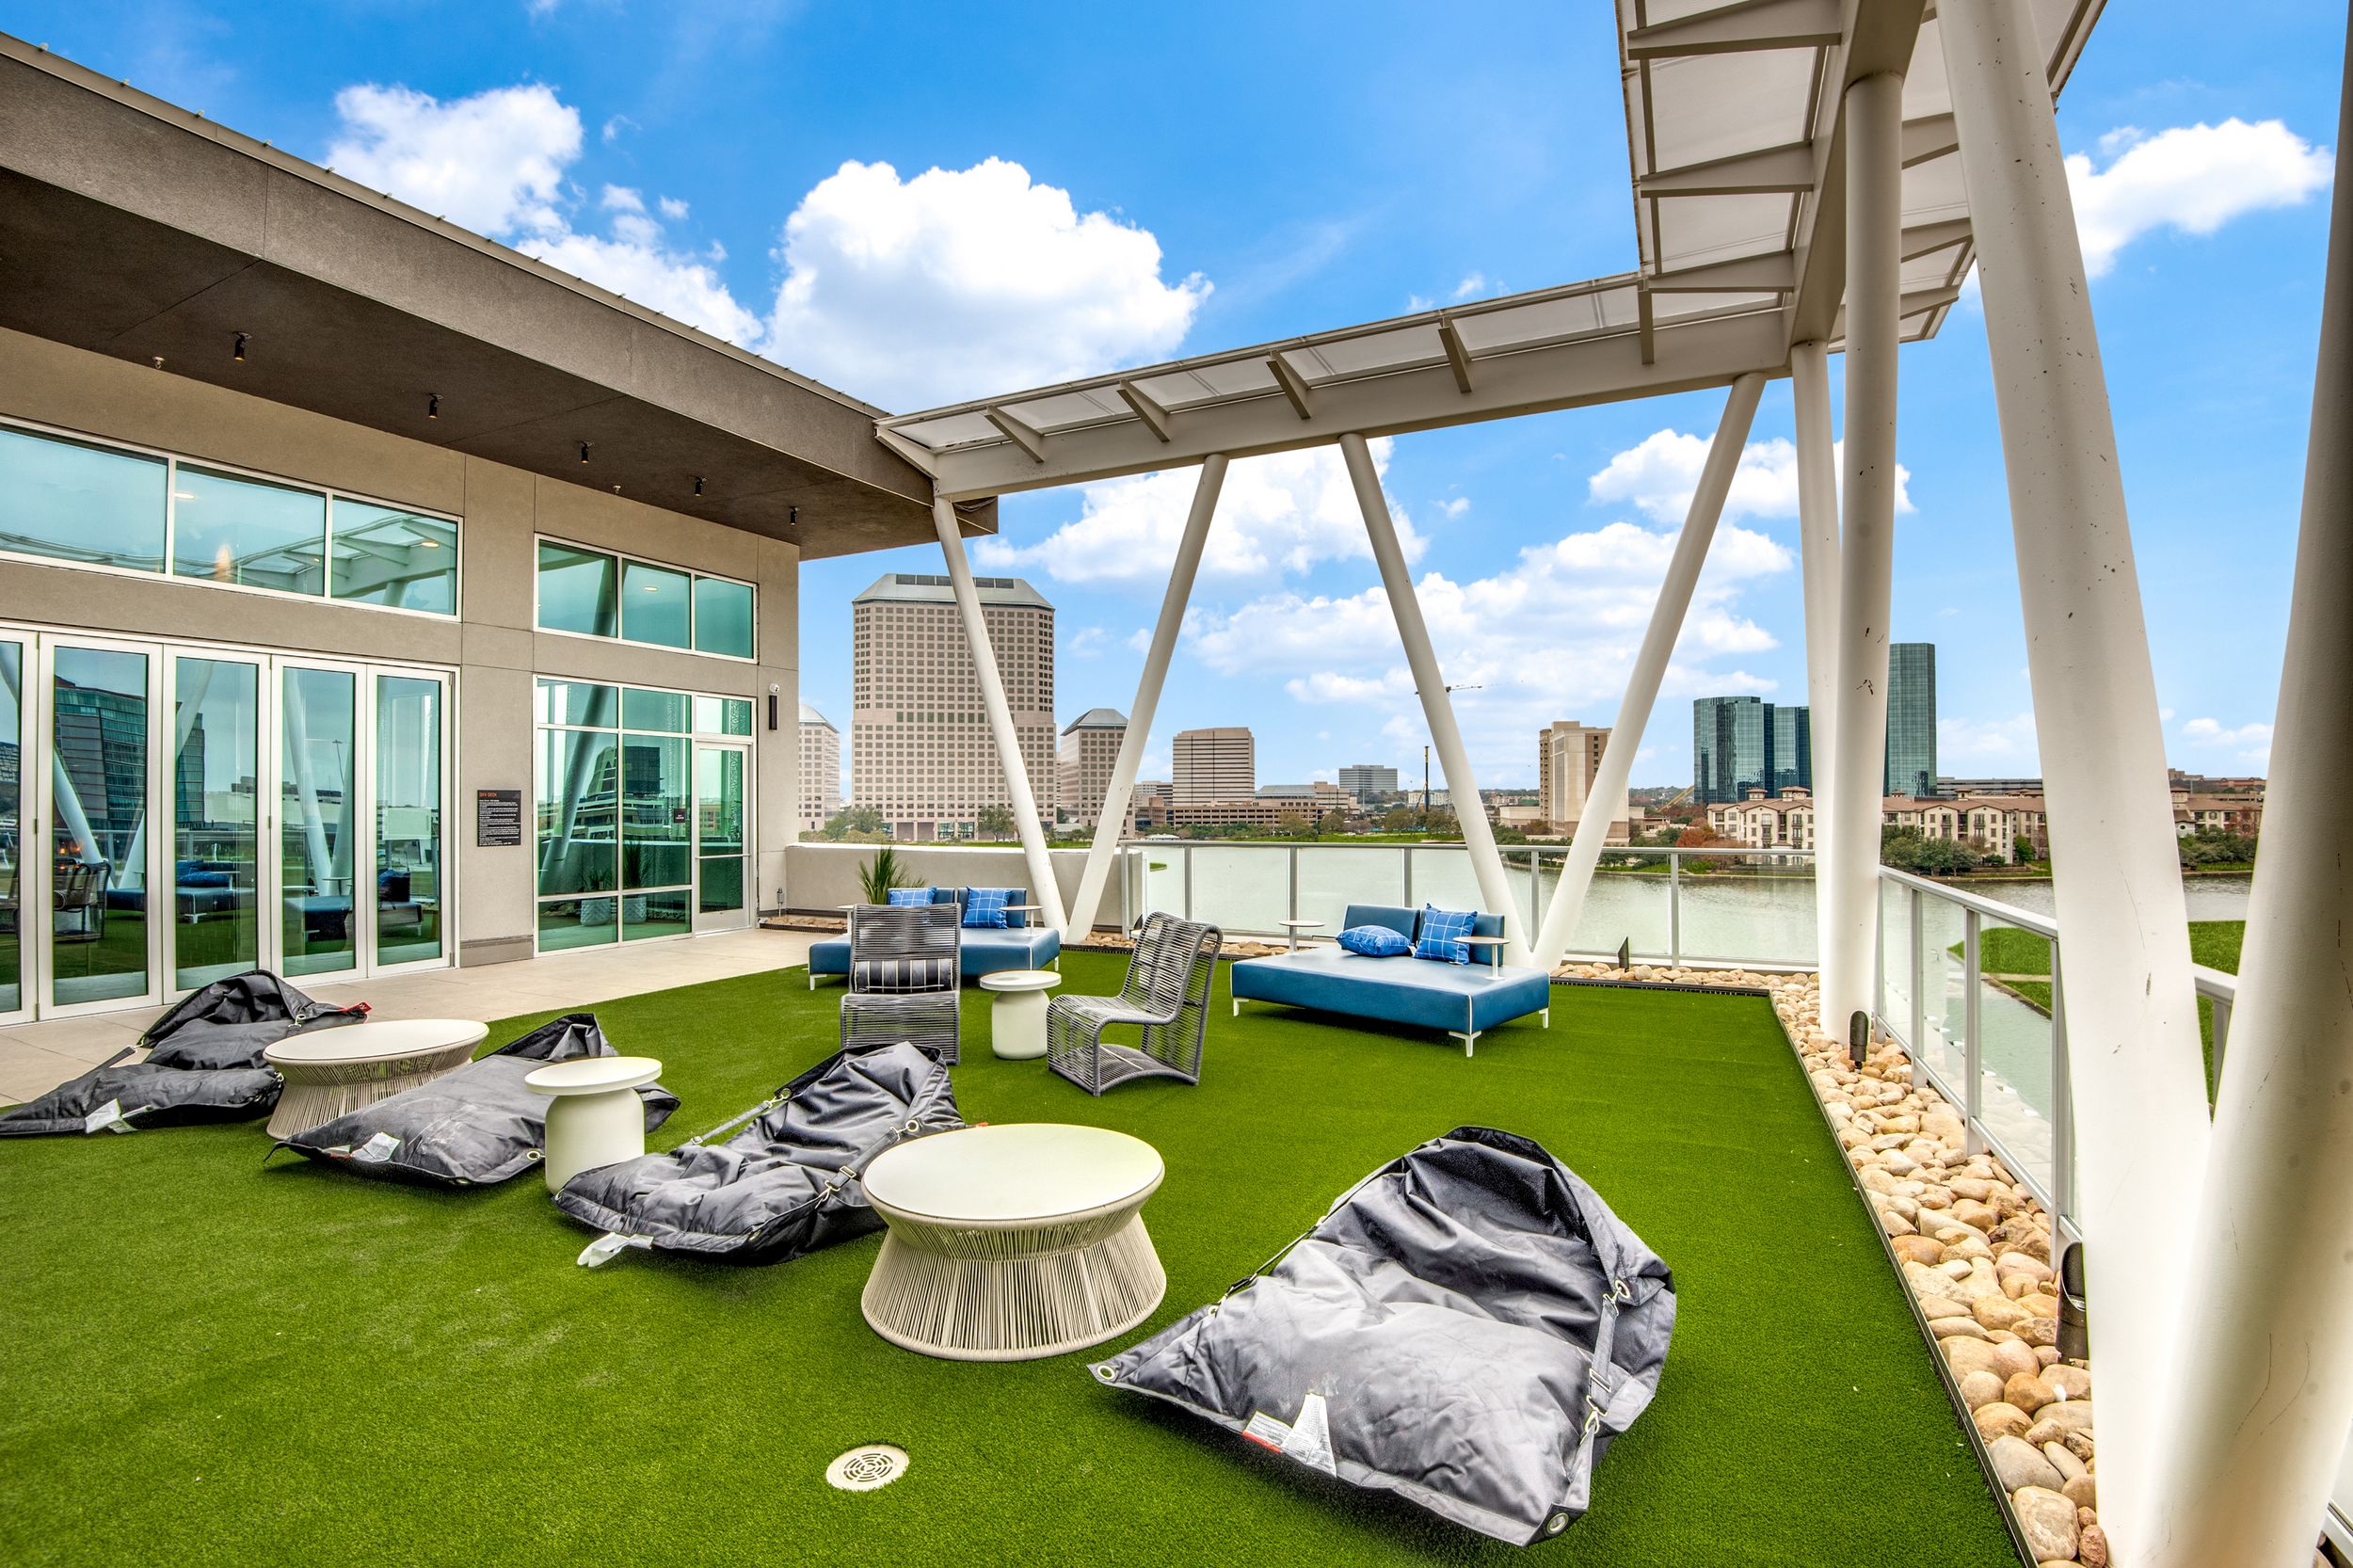 Rooftop lounge area with seating